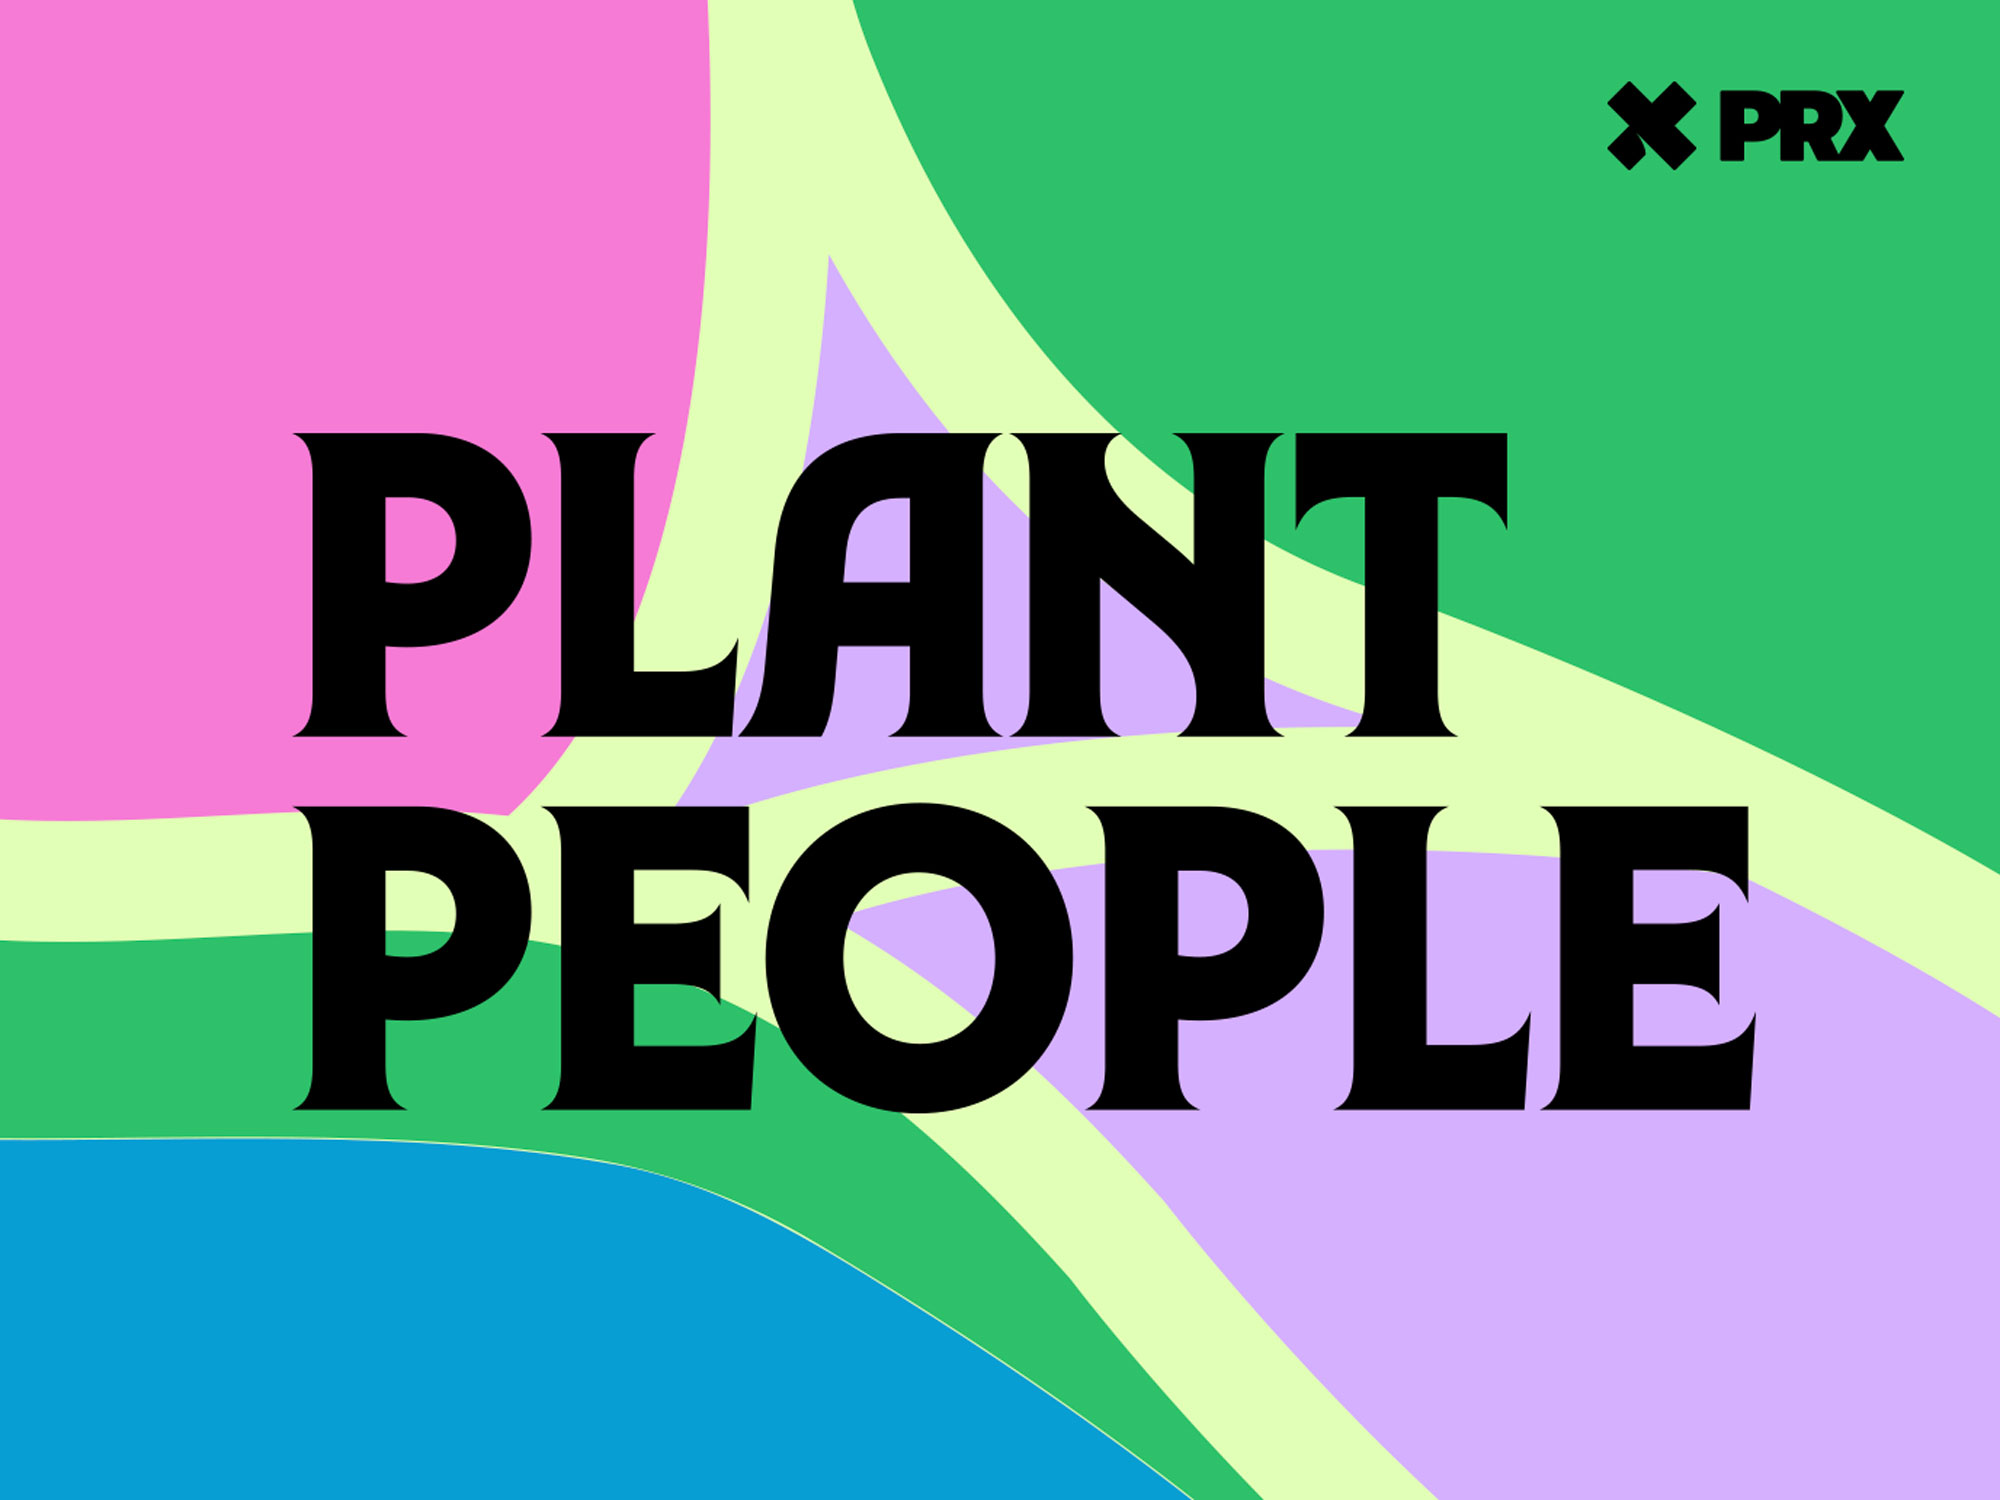 A colorful graphic image that says "Plant People"